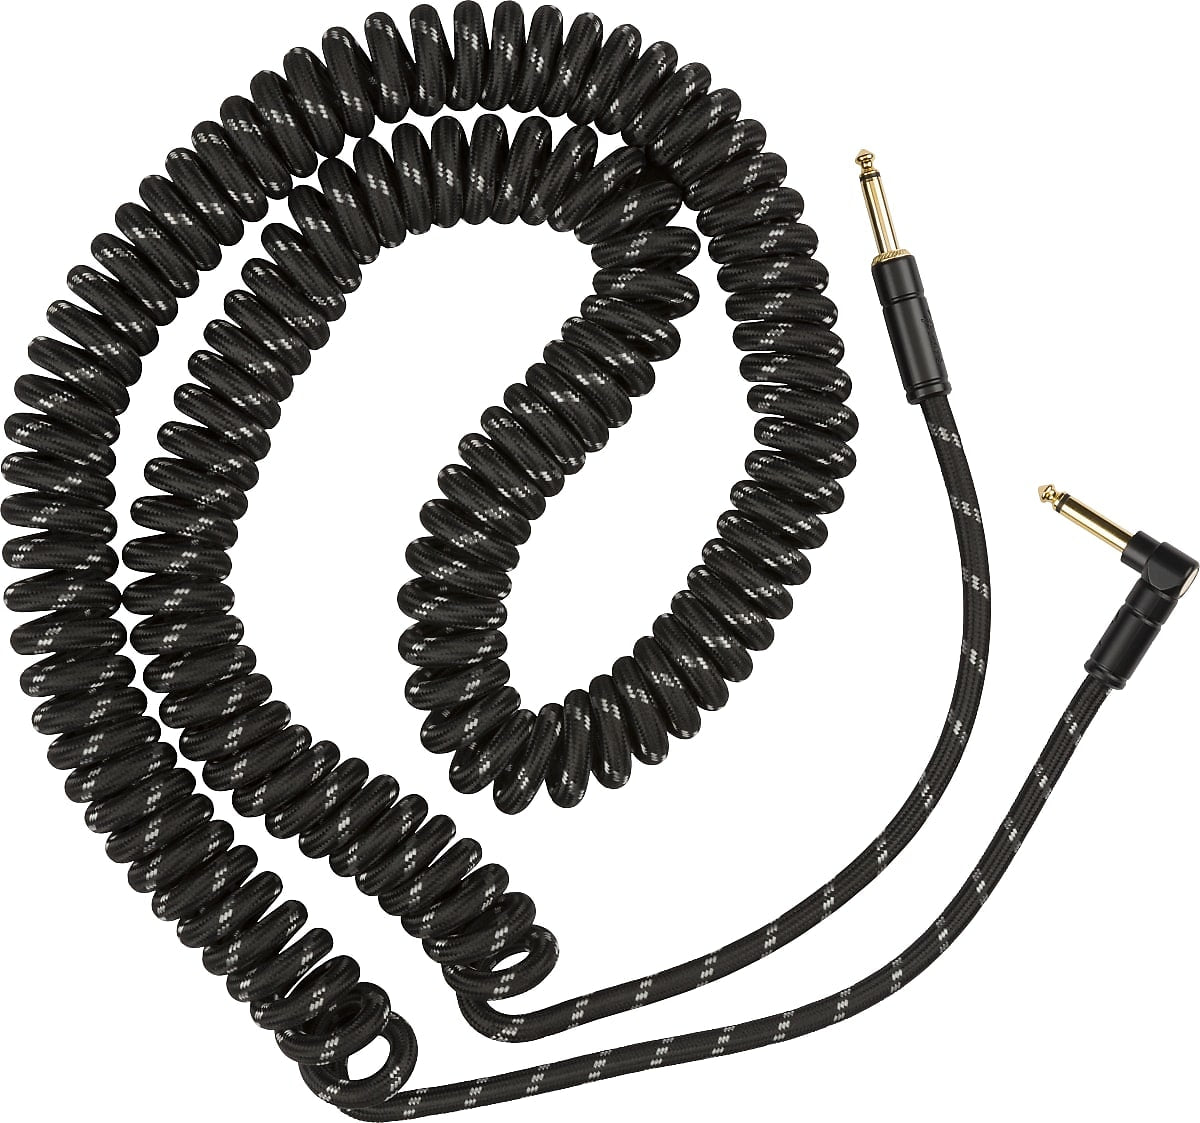 Fender Deluxe Coil Cable, 30', Black Tweed